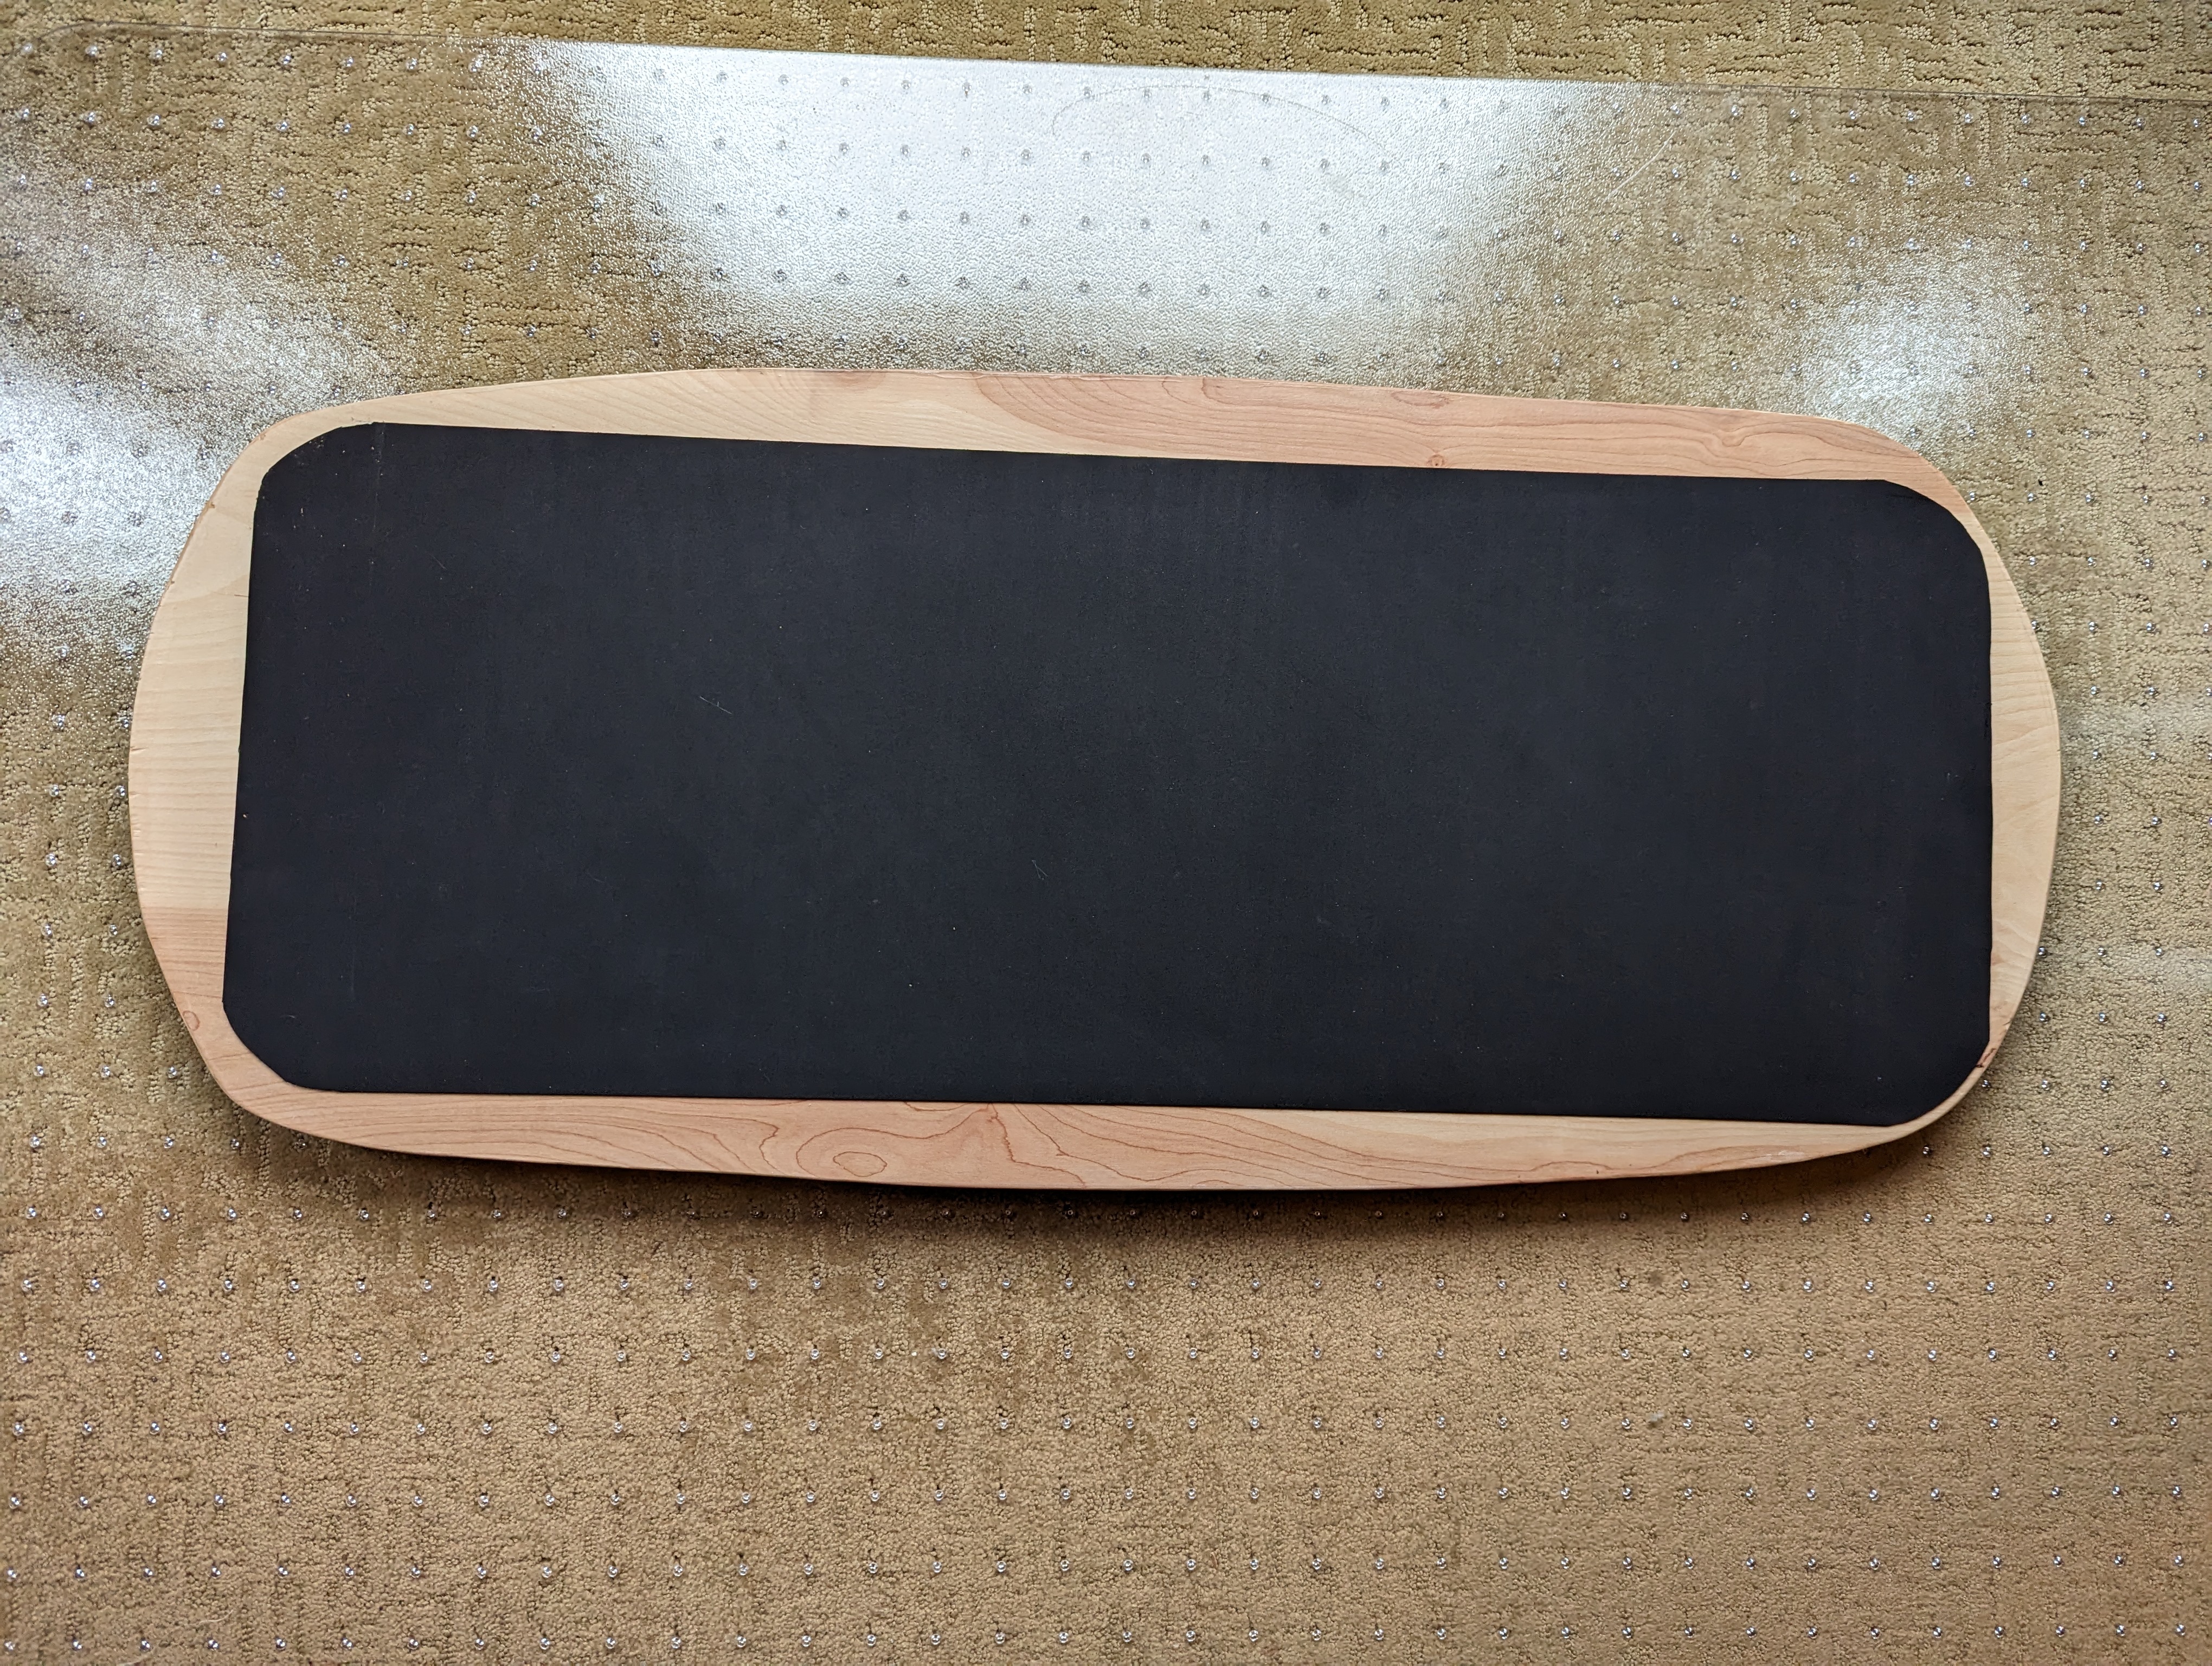 Top of the balance board